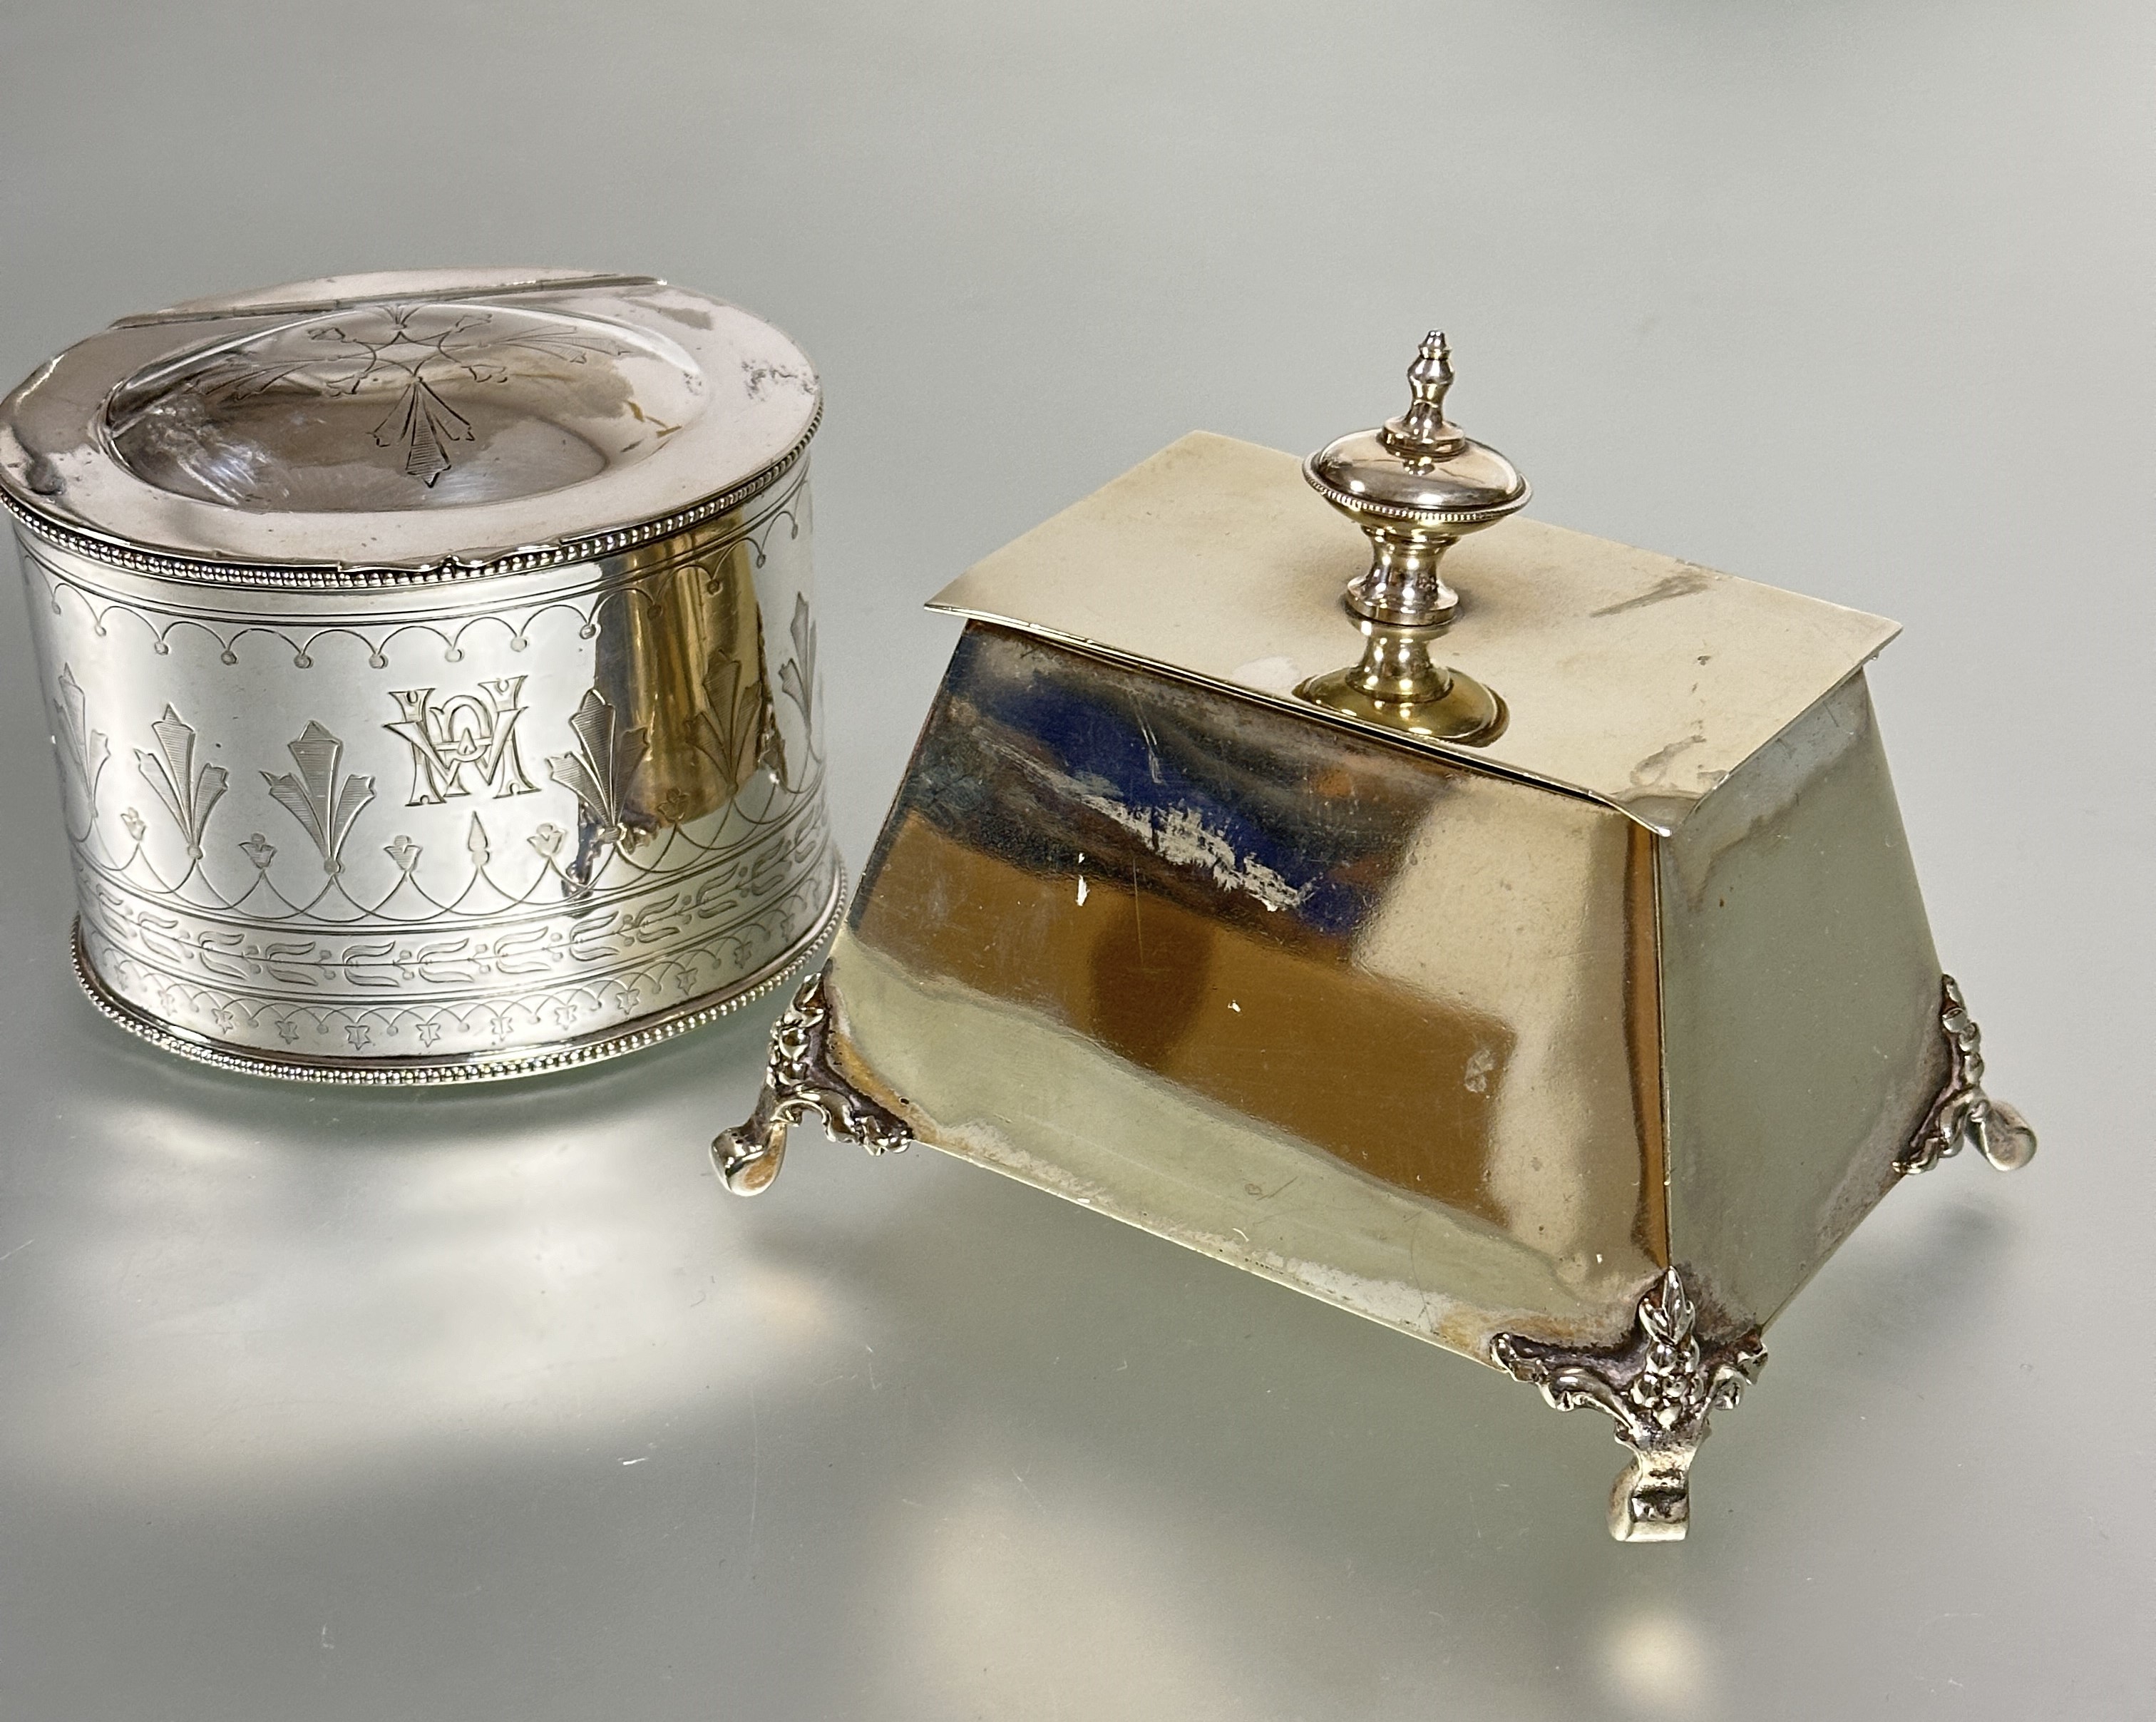 A Edwardian Elkington & Co oval tea caddy the hinged top with leaf design and beaded border engraved